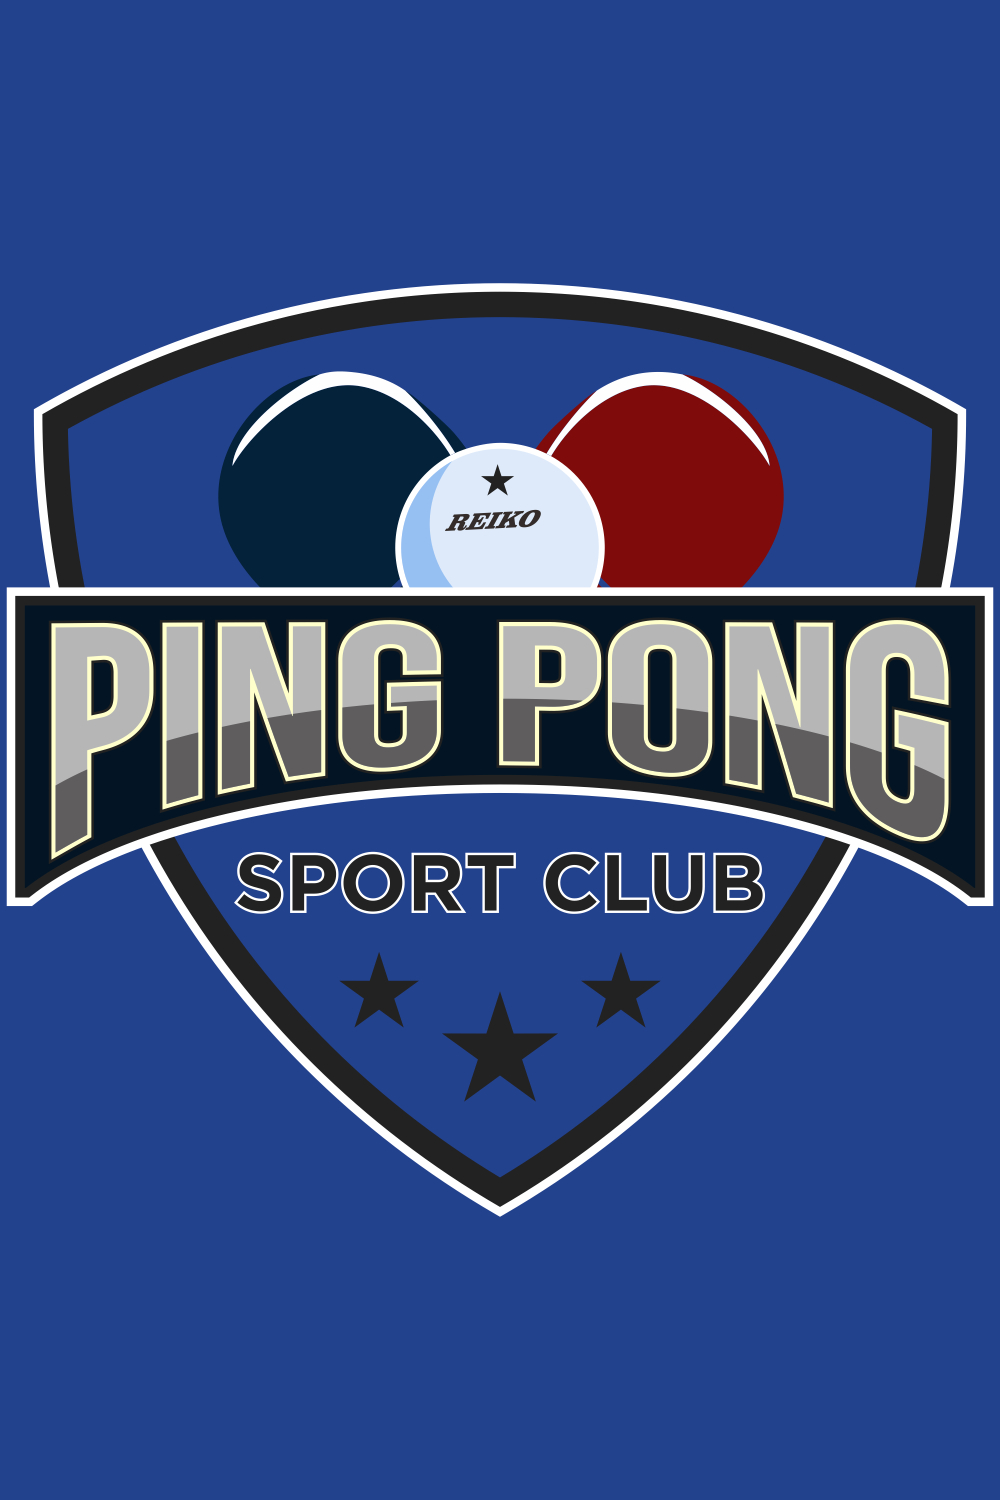 Table tennis badge emblem logo Sports label vector illustration for a ping pong club pinterest preview image.